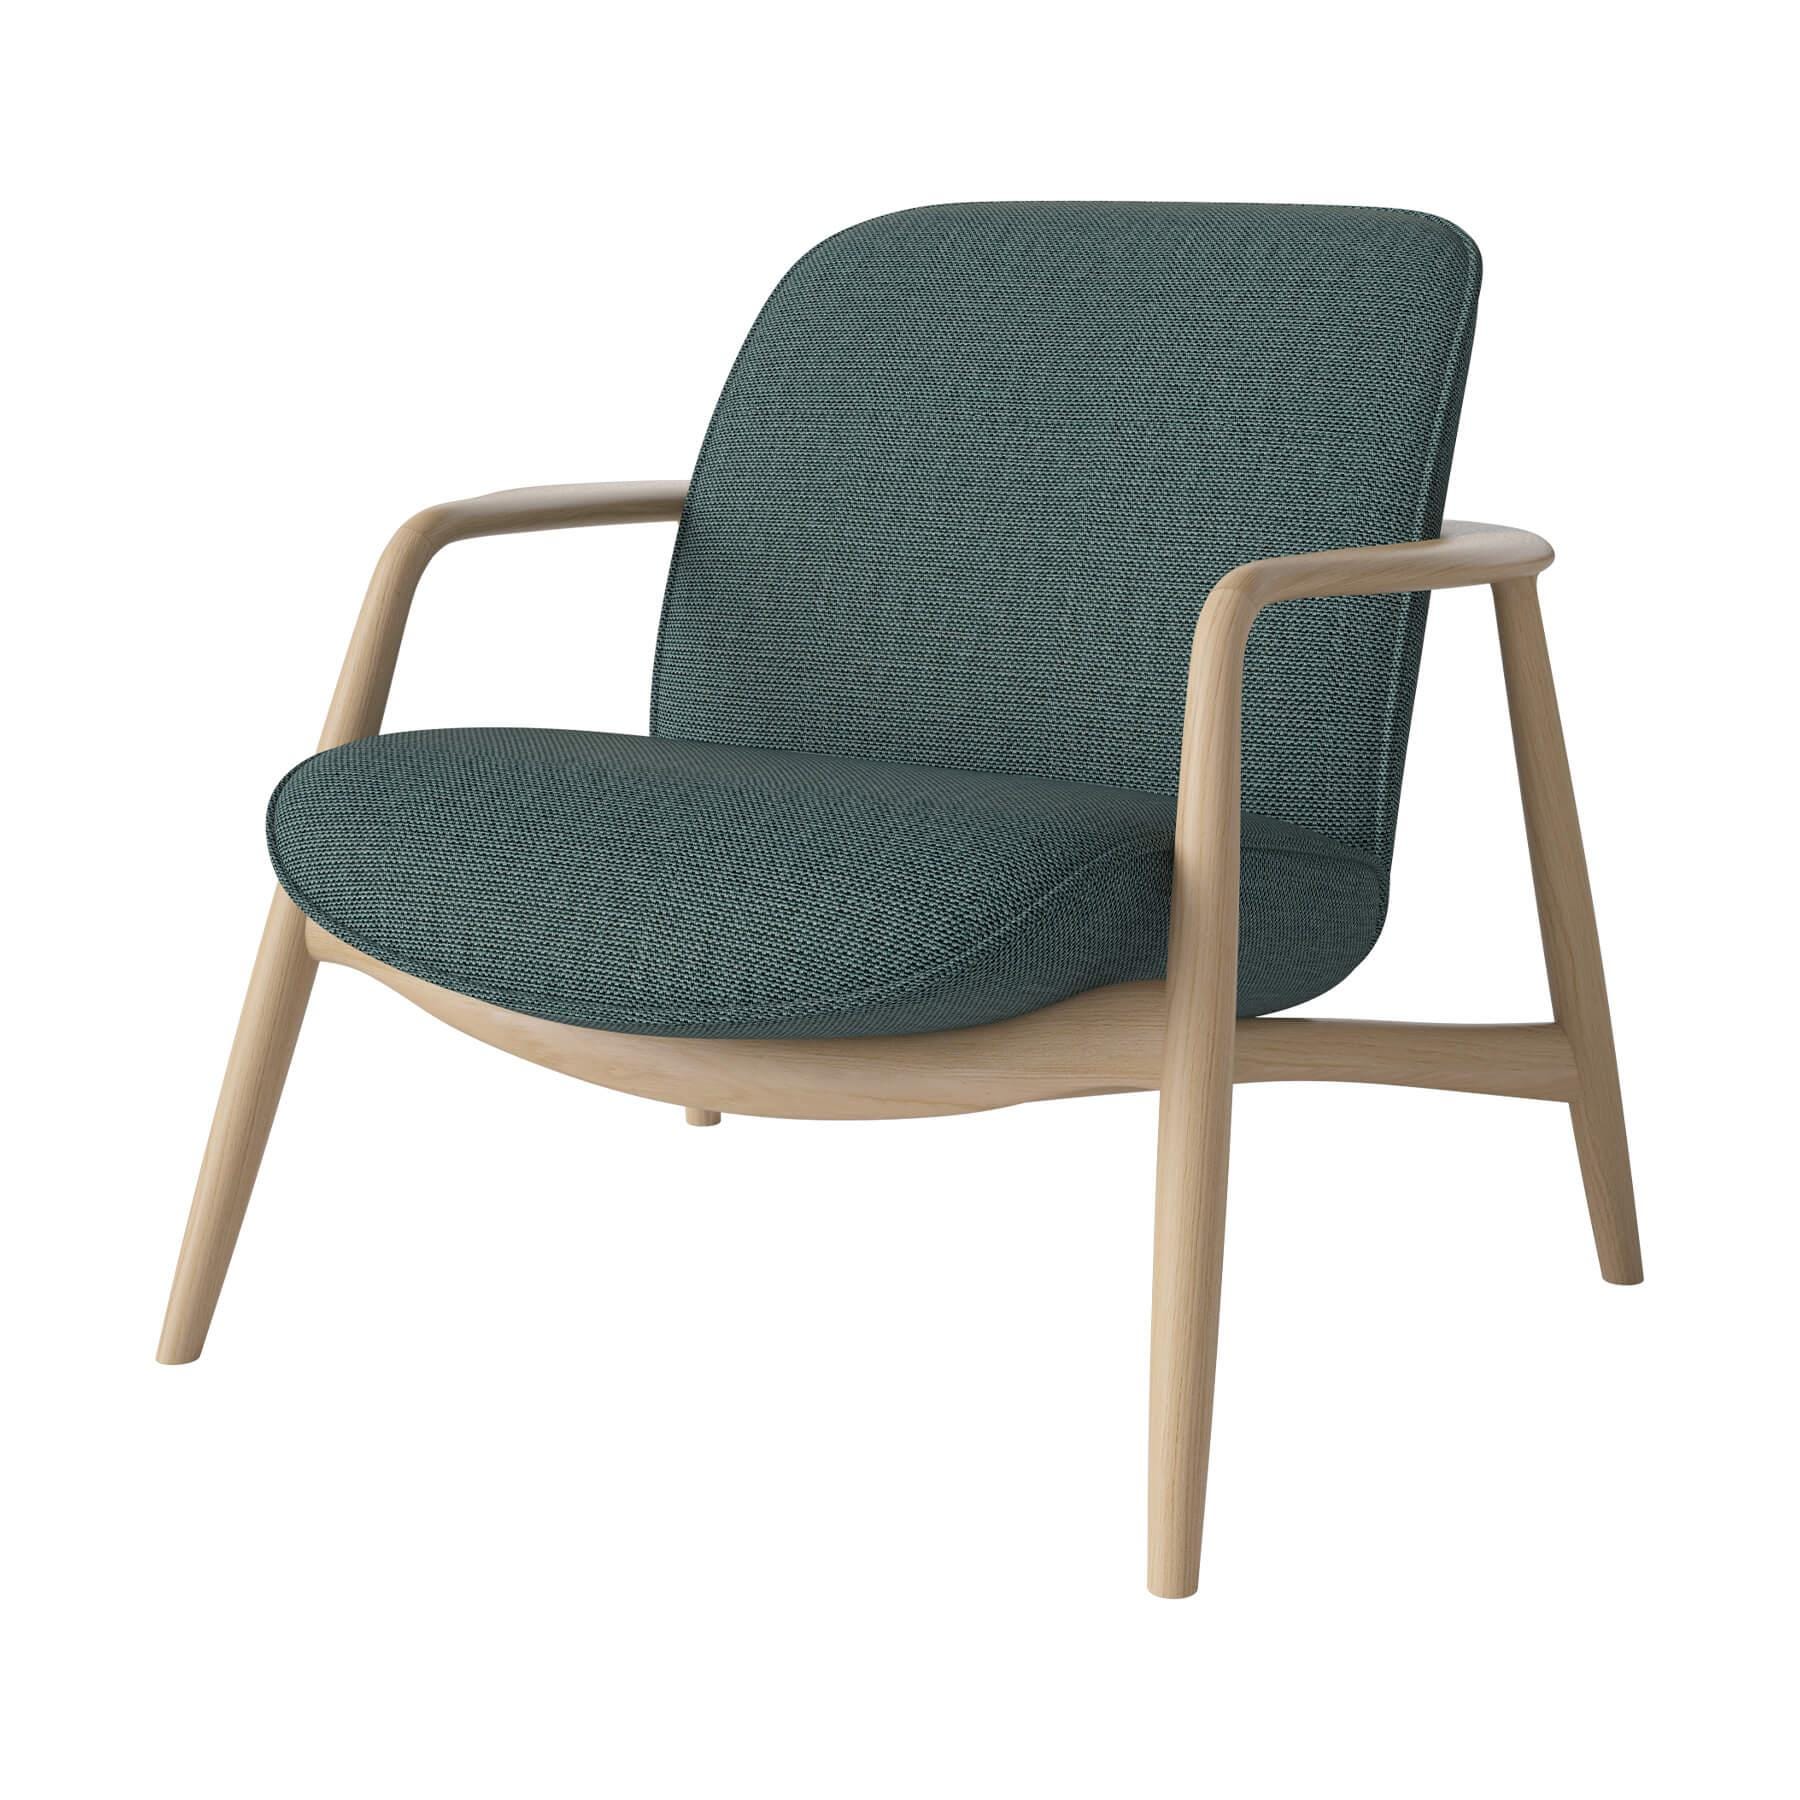 Bolia Bowie Armchair White Oiled Oak London Sea Green Designer Furniture From Holloways Of Ludlow